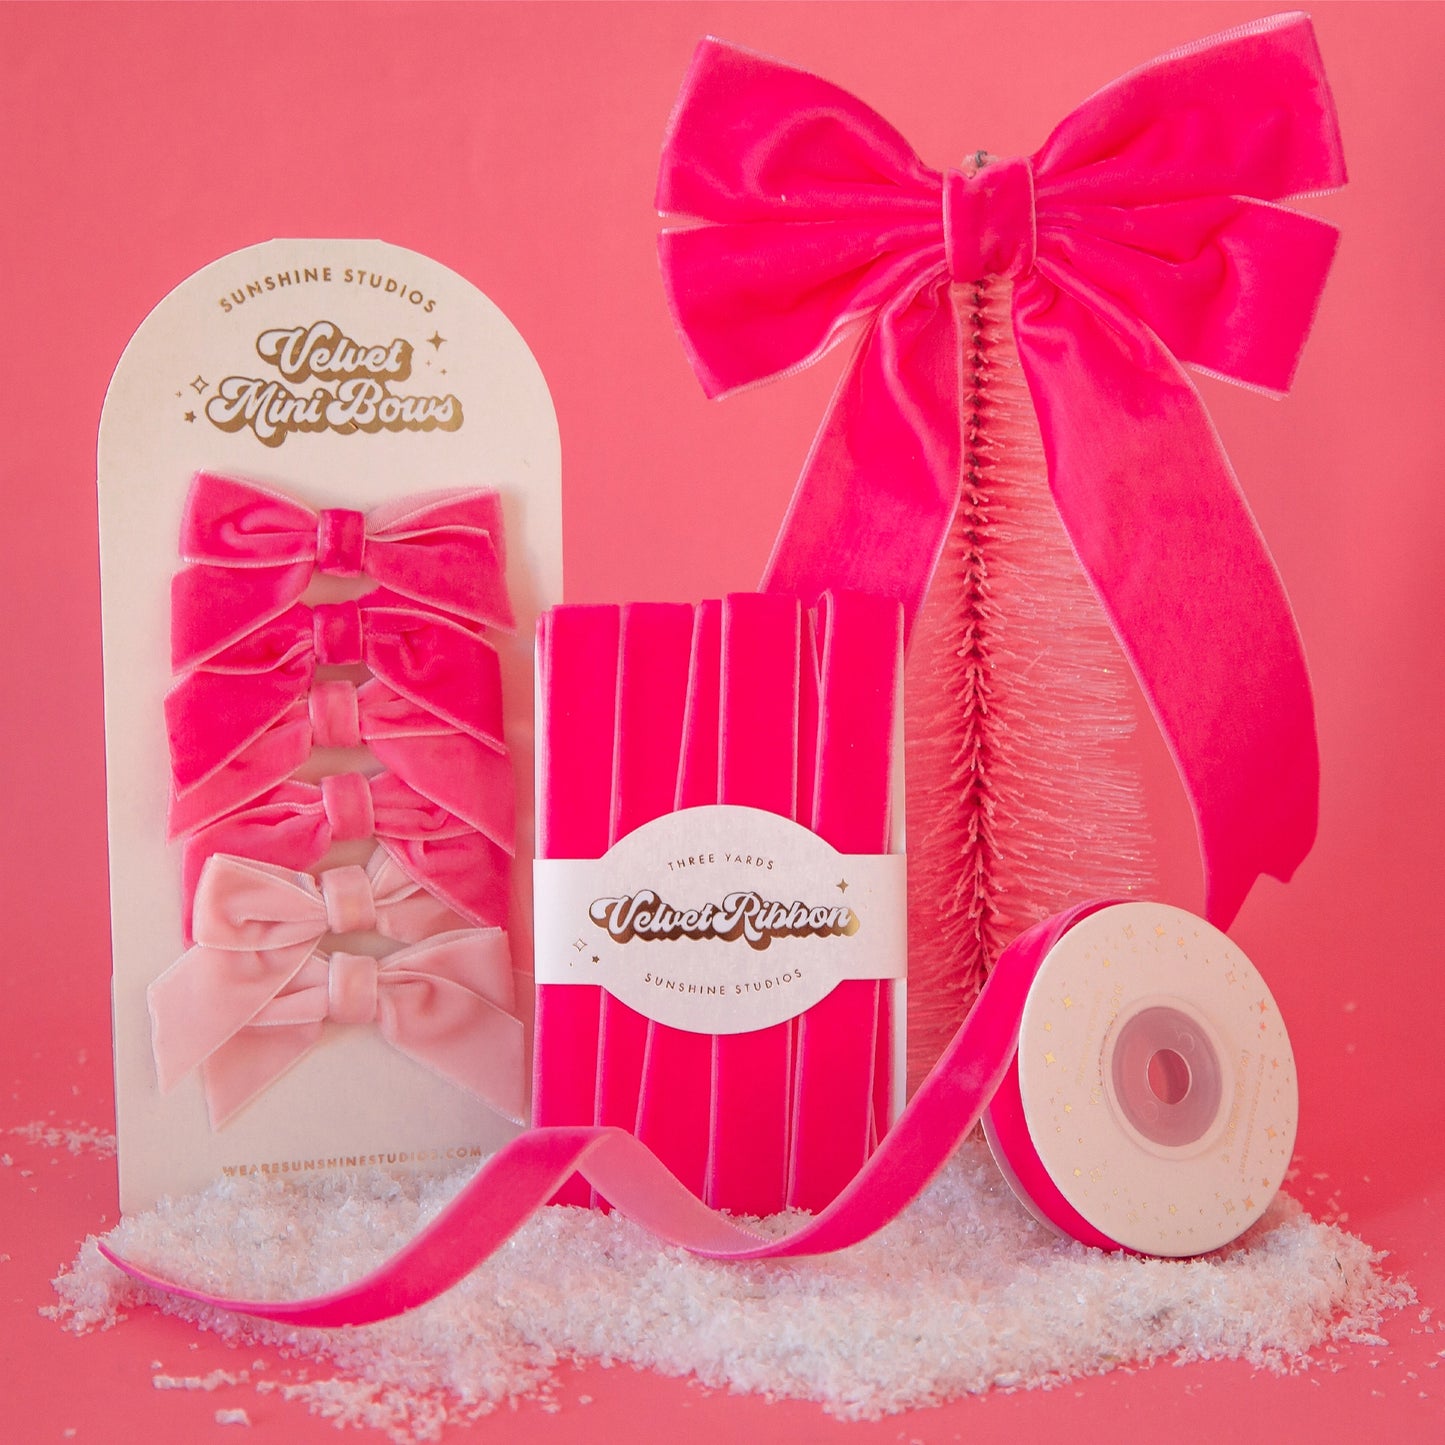 On a pink background is the entire collection of pink velvet bows and ribbons.